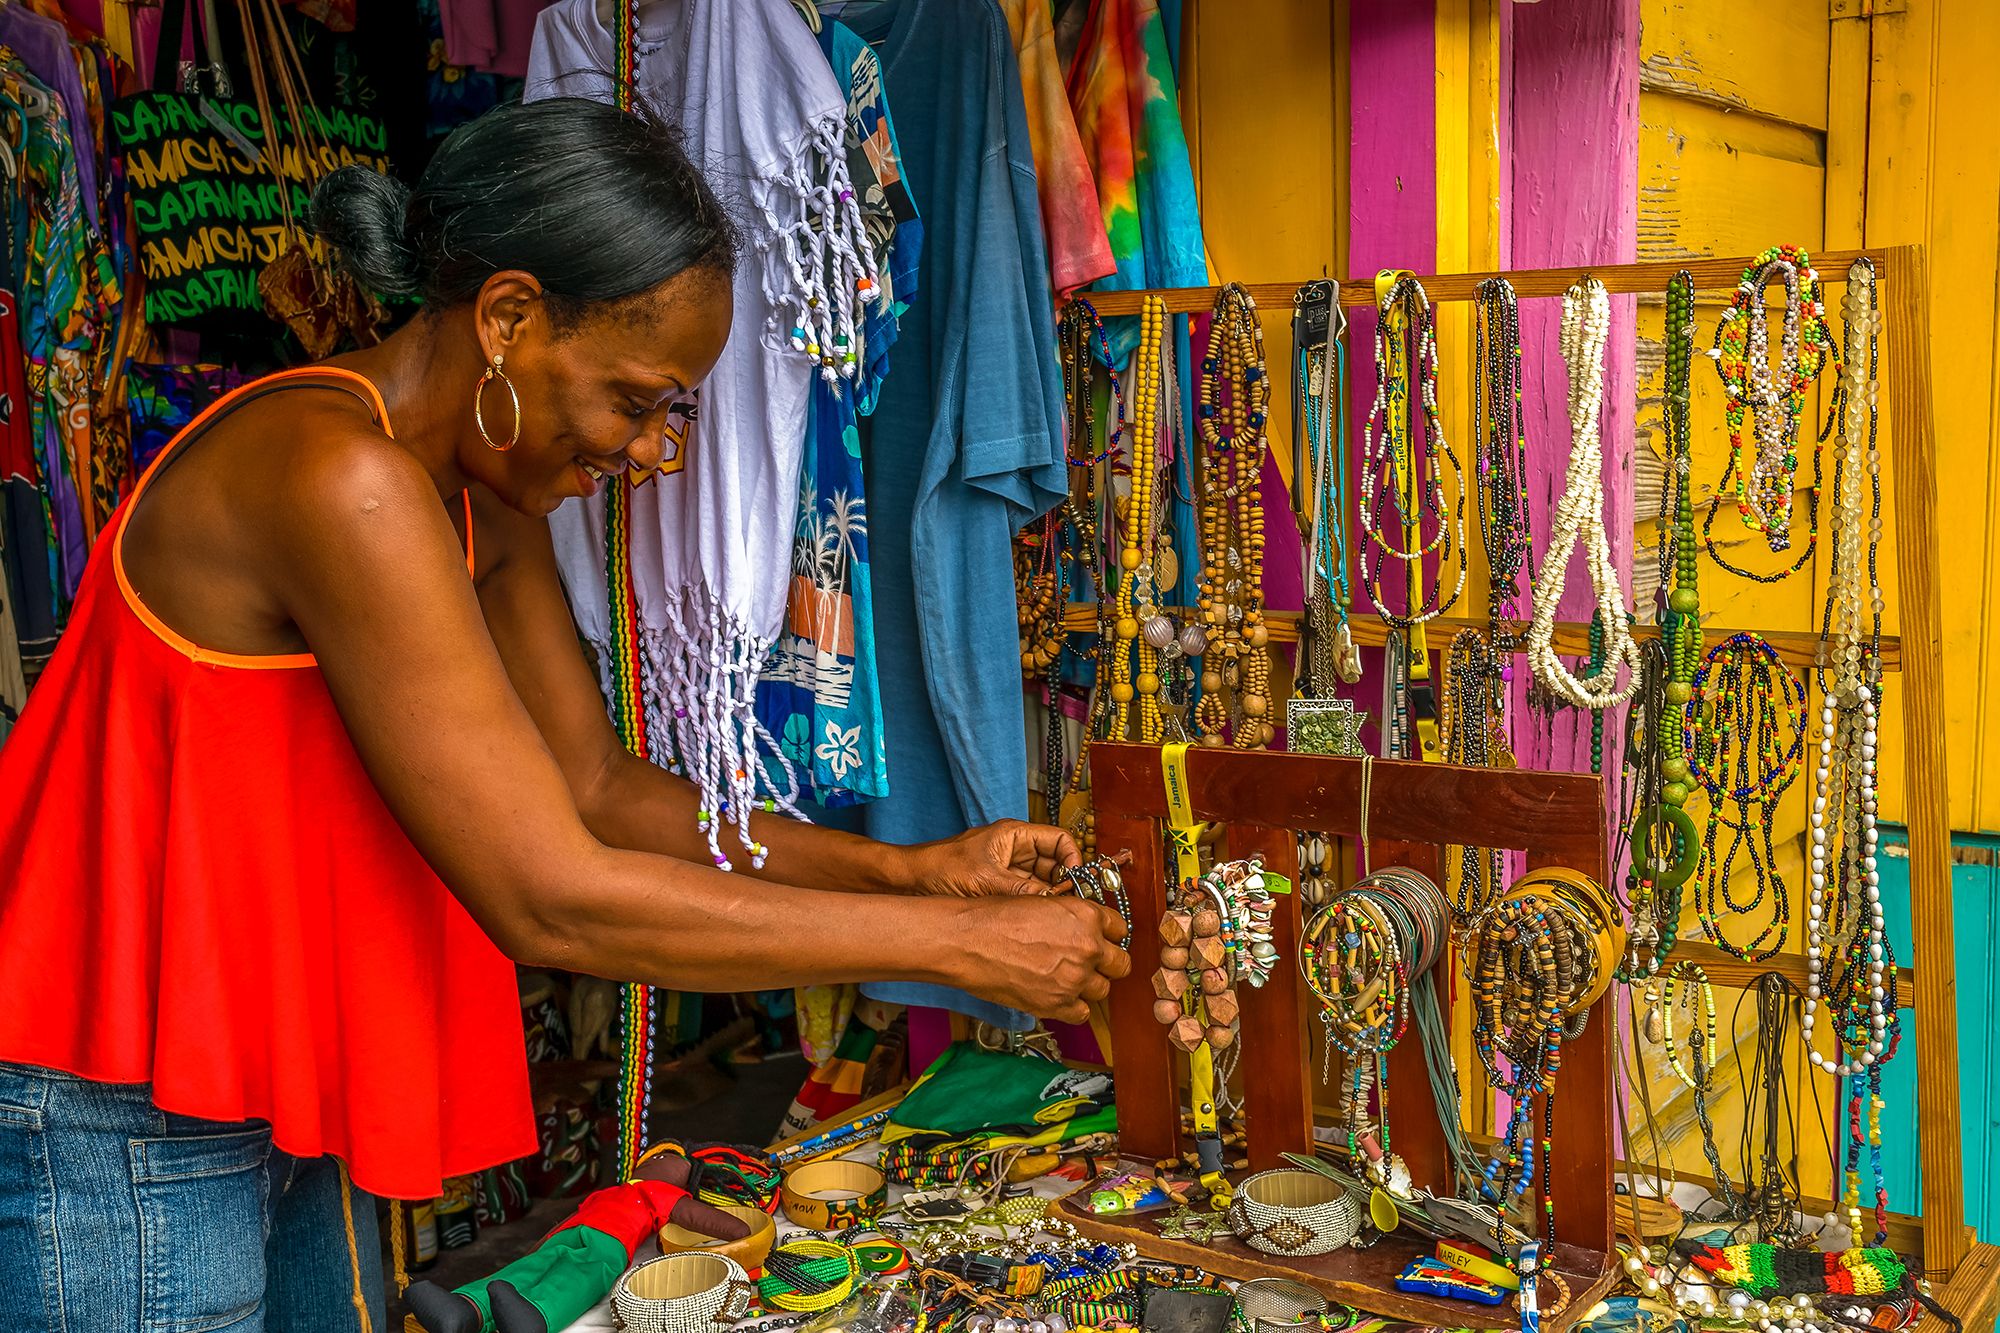 Vacation Shopping In Jamaica â€” Where To Go & What To Expect!